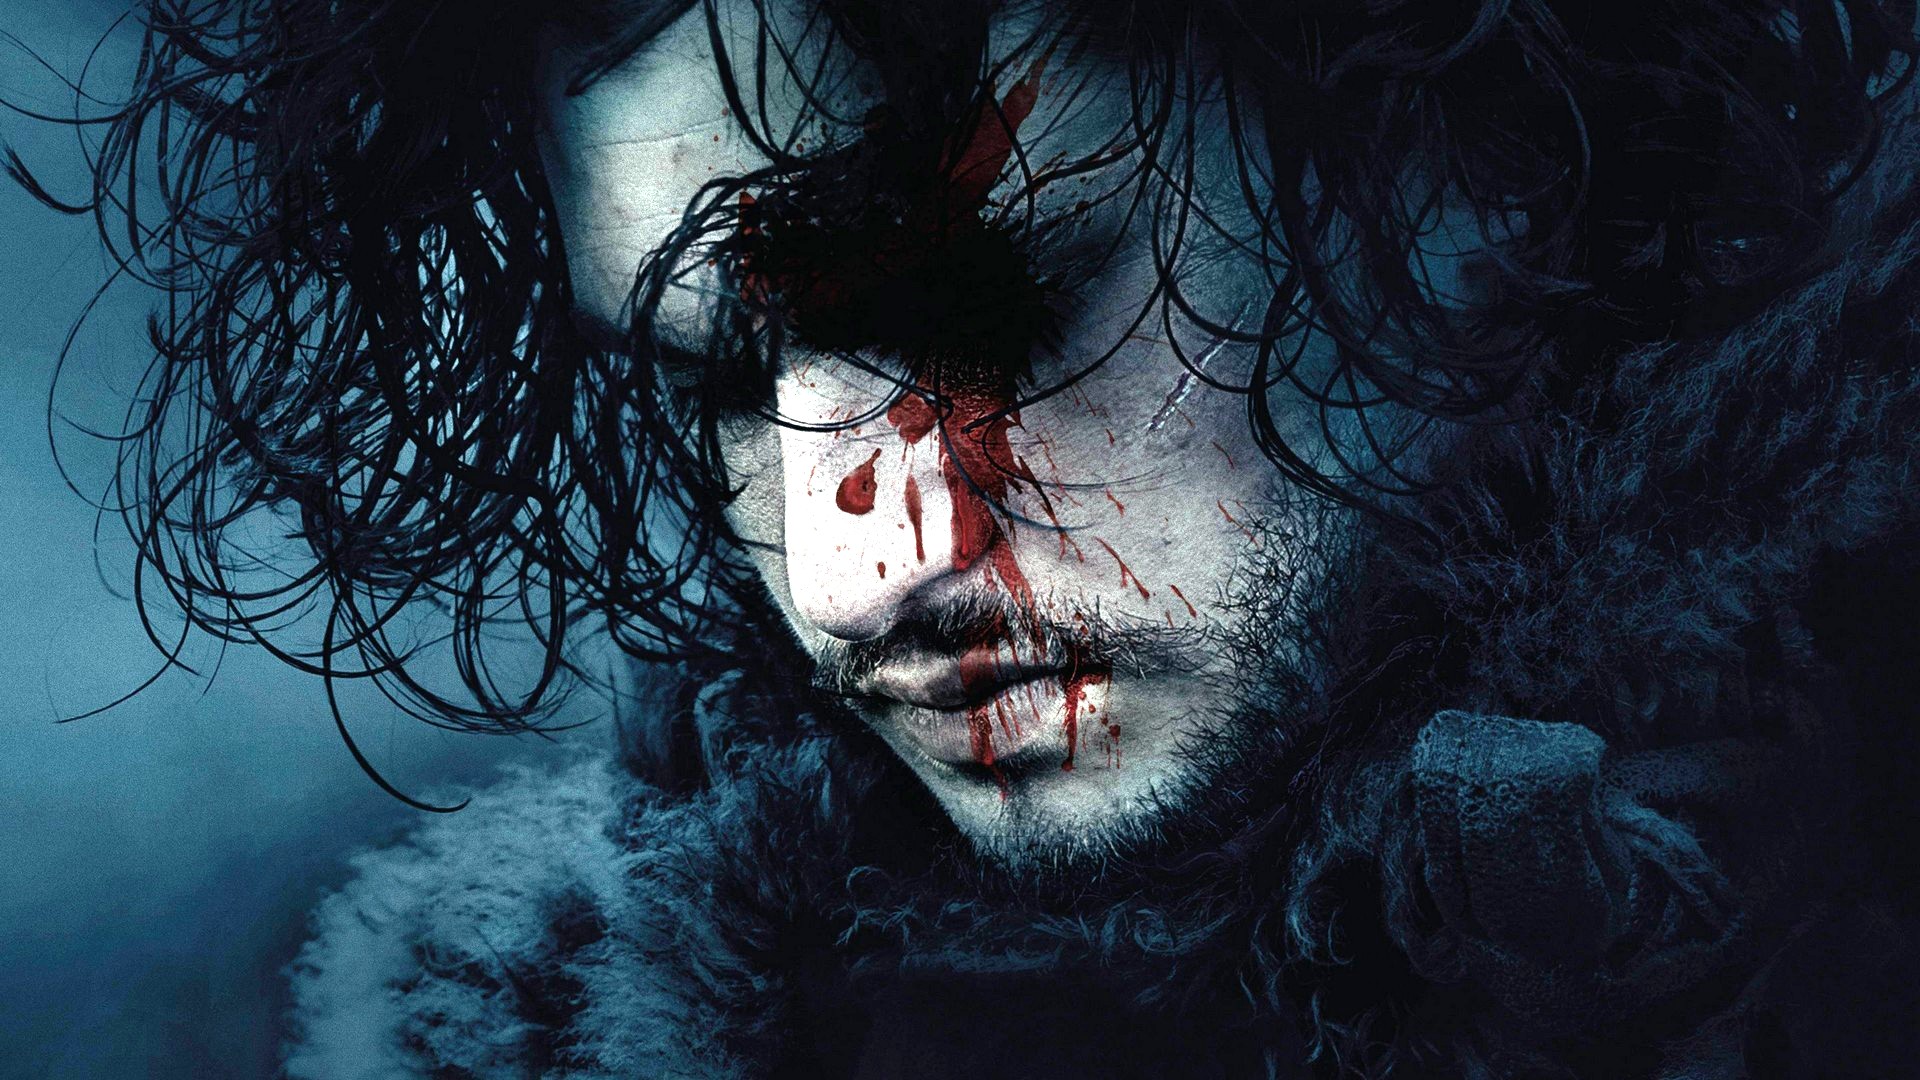 Game of Thrones Wallpaper with high-resolution 1920x1080 pixel. You can use this poster wallpaper for your Desktop Computers, Mac Screensavers, Windows Backgrounds, iPhone Wallpapers, Tablet or Android Lock screen and another Mobile device